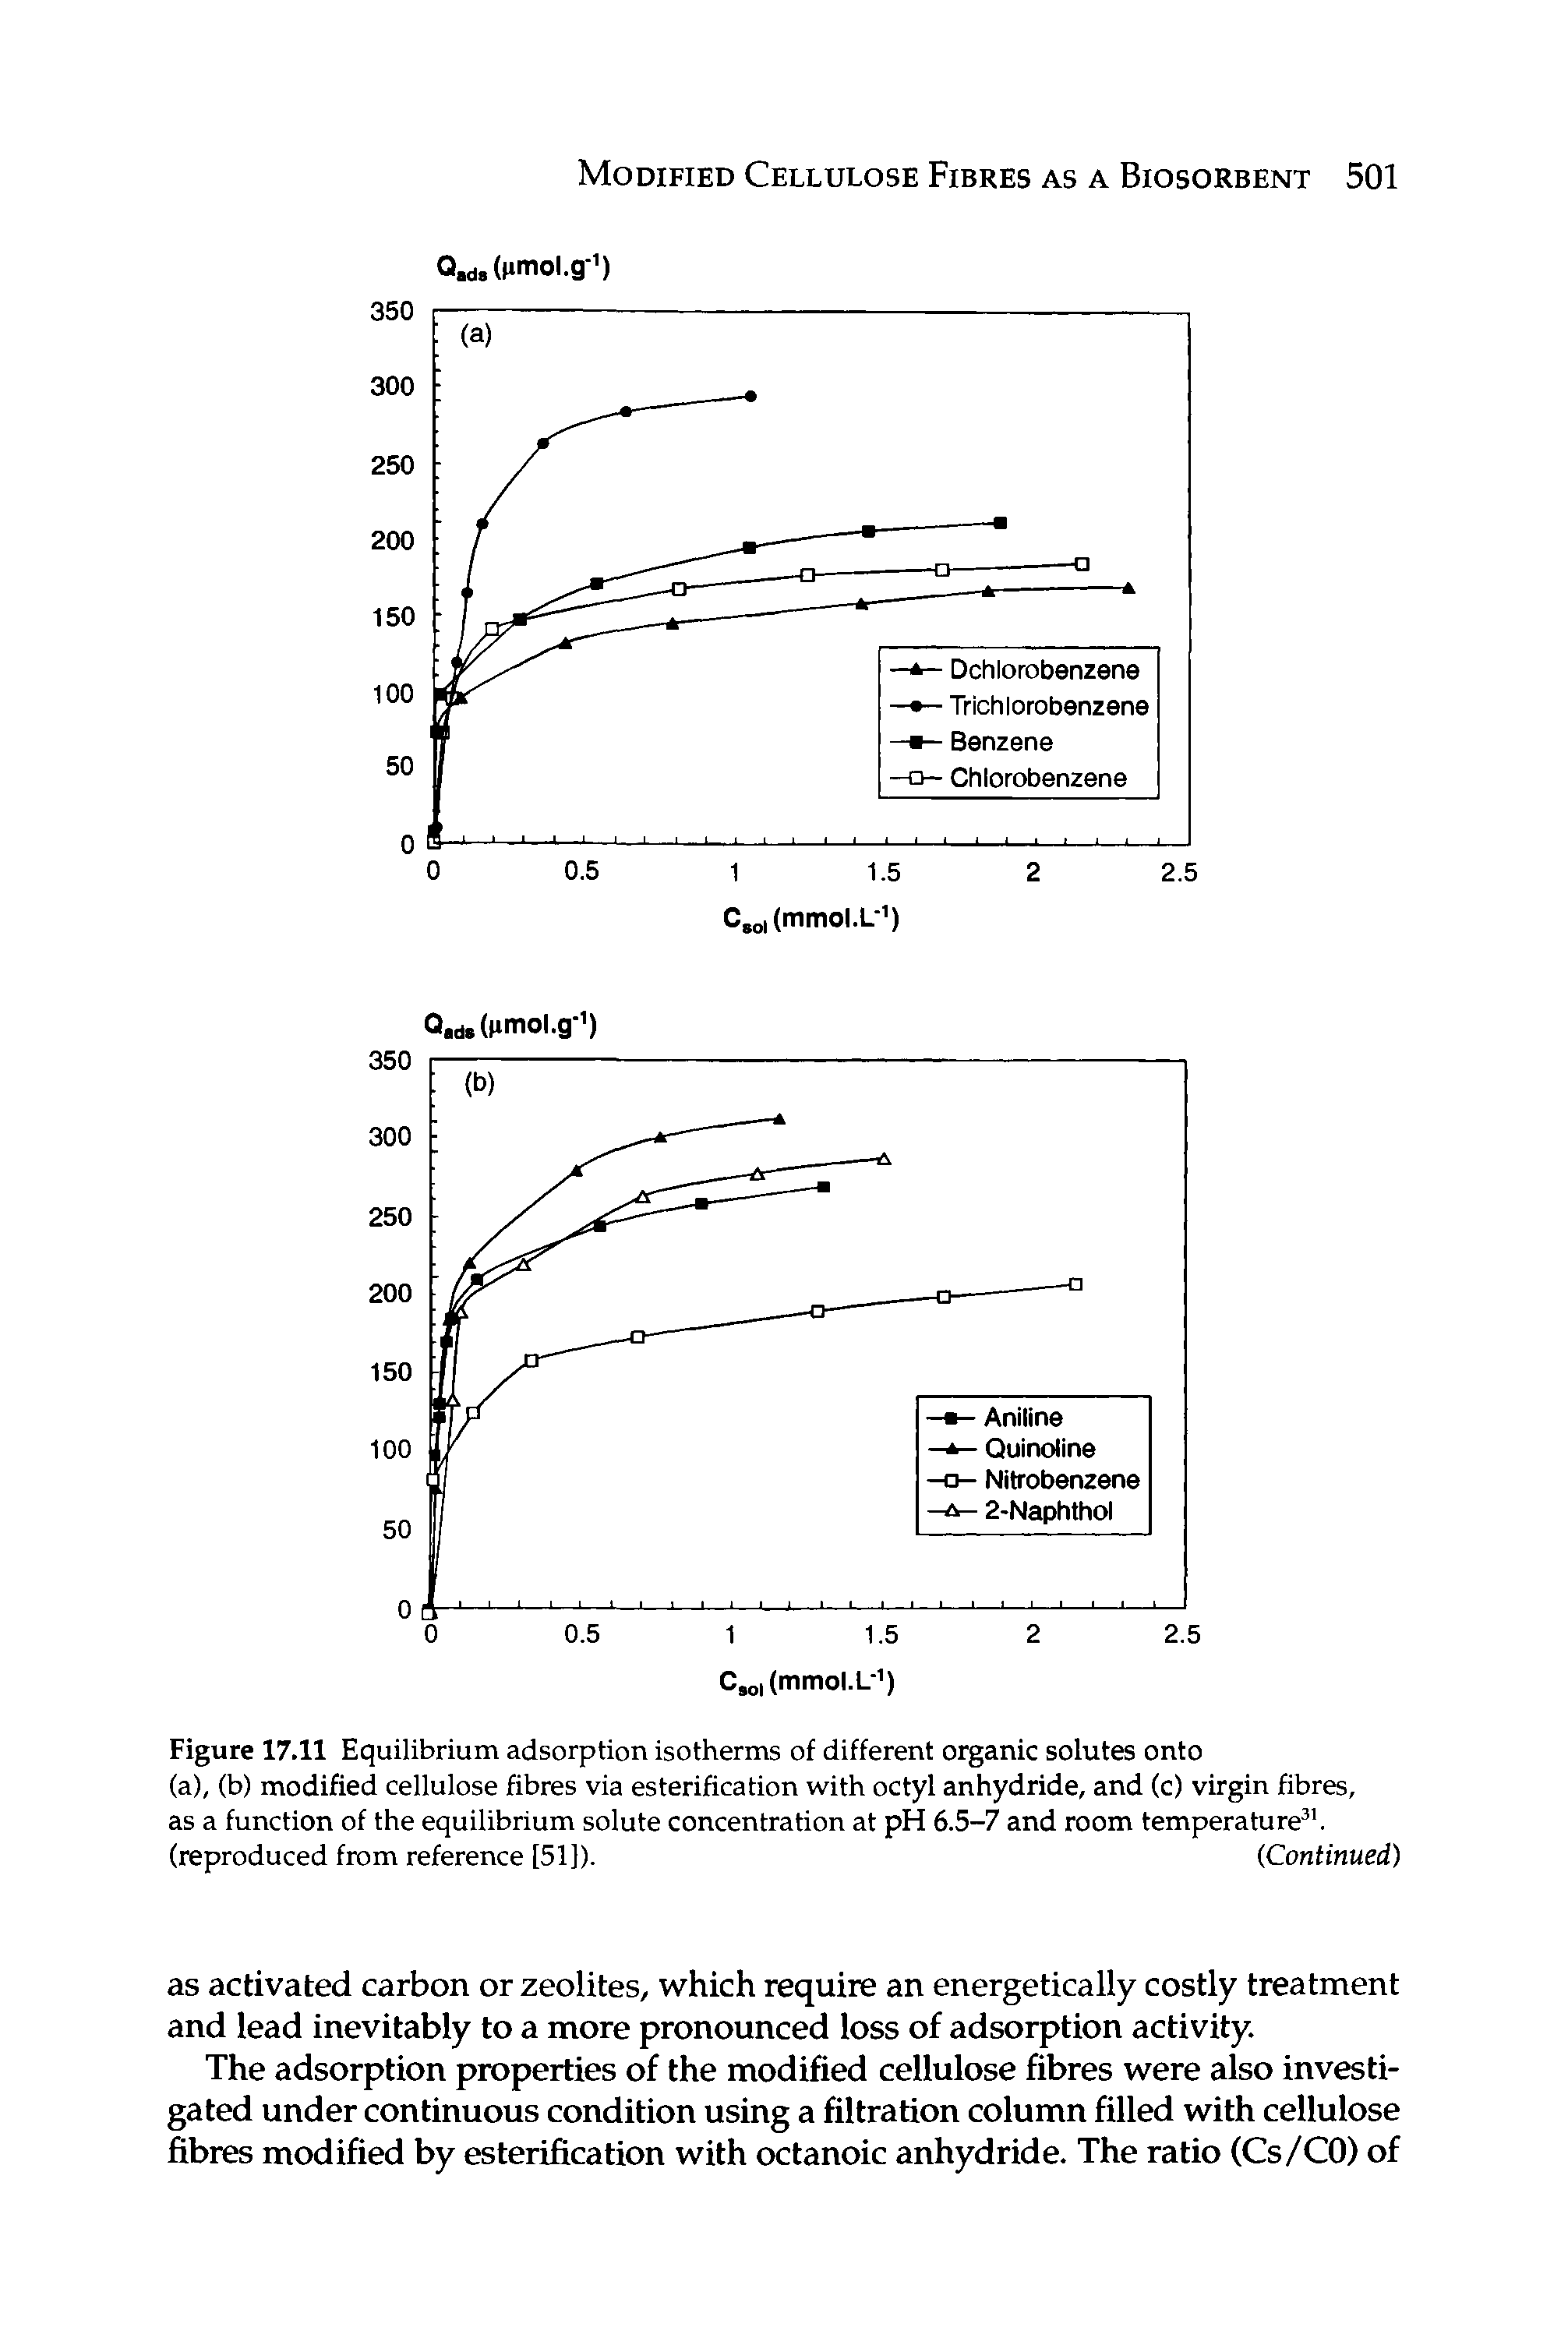 Figure 17.11 Equilibrium adsorption isotherms of different organic solutes onto (a), (b) modified cellulose fibres via esterification with octyl anhydride, and (c) virgin fibres, as a function of the equilibrium solute concentration at pH 6.5-7 and room temperature, (reproduced from reference [51]). (Continued)...